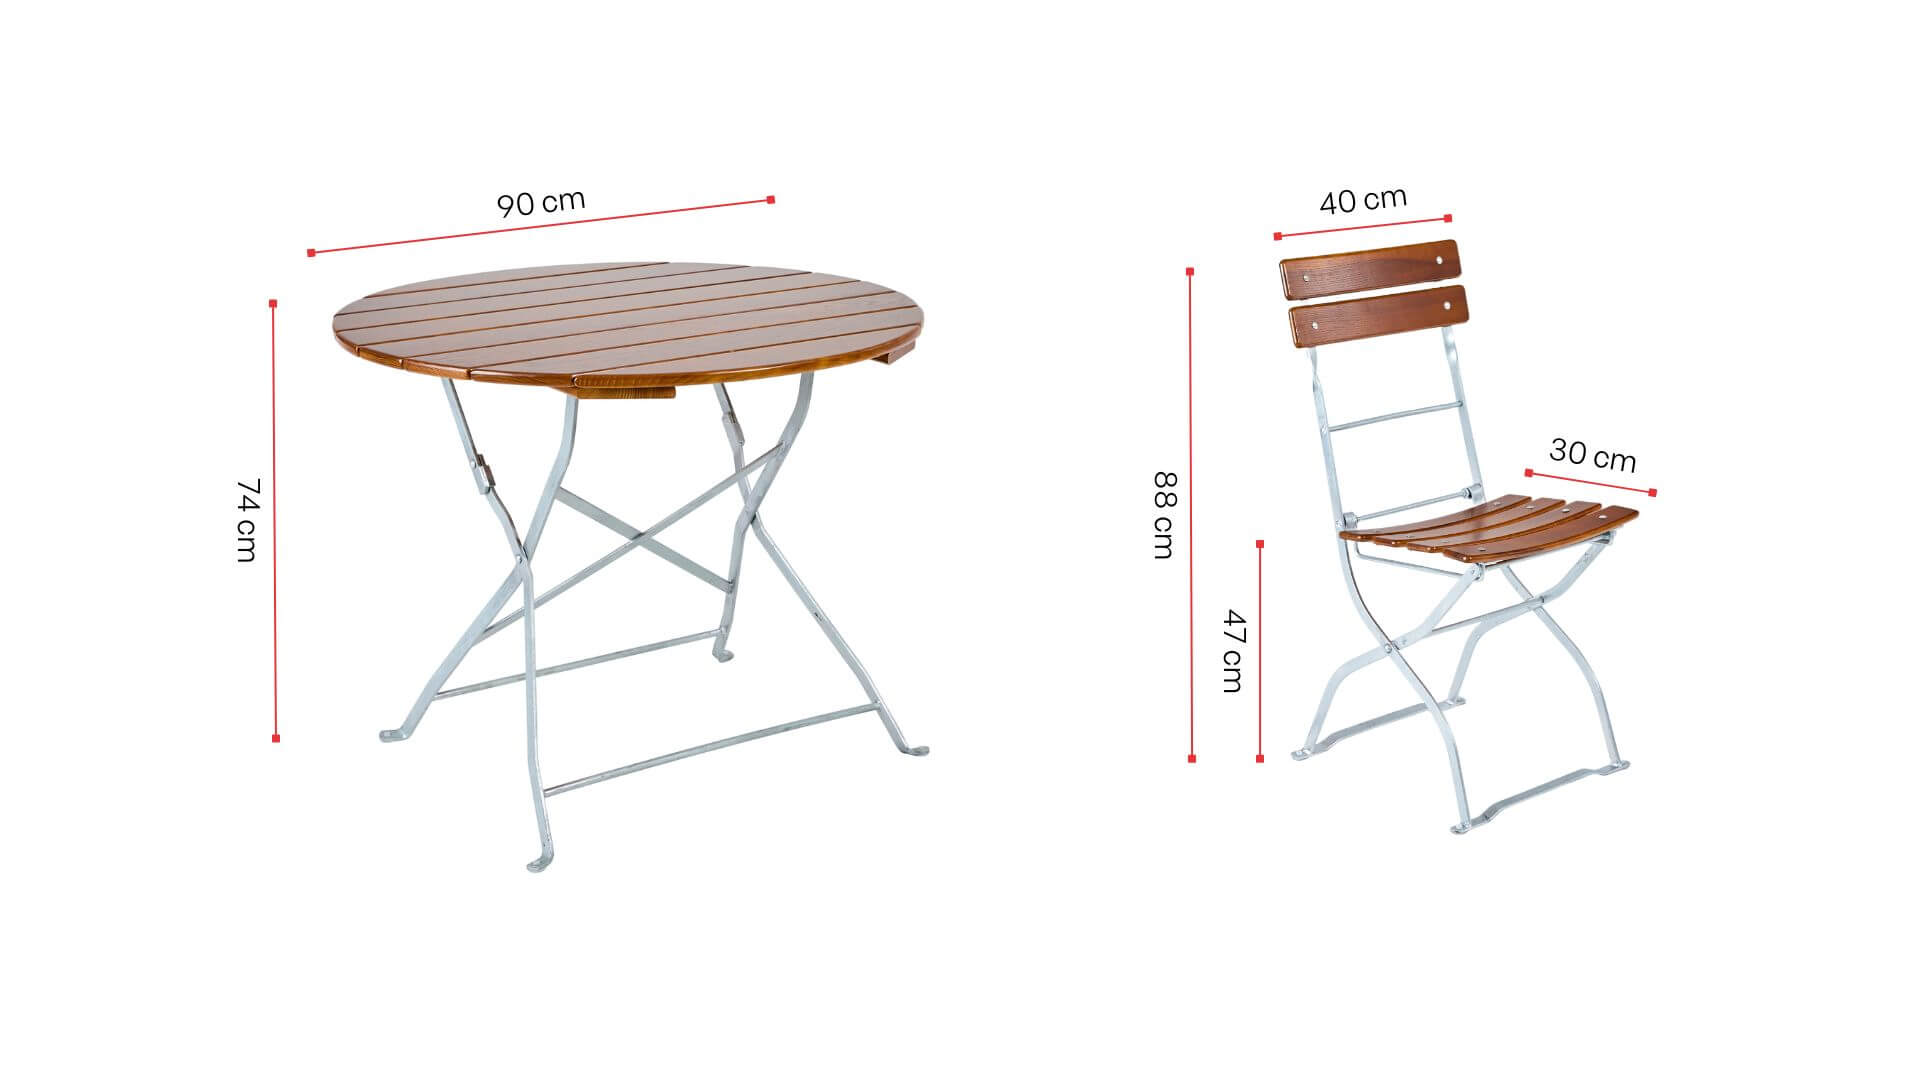 The dimensions of the round beer garden table and beer garden chair are shown.